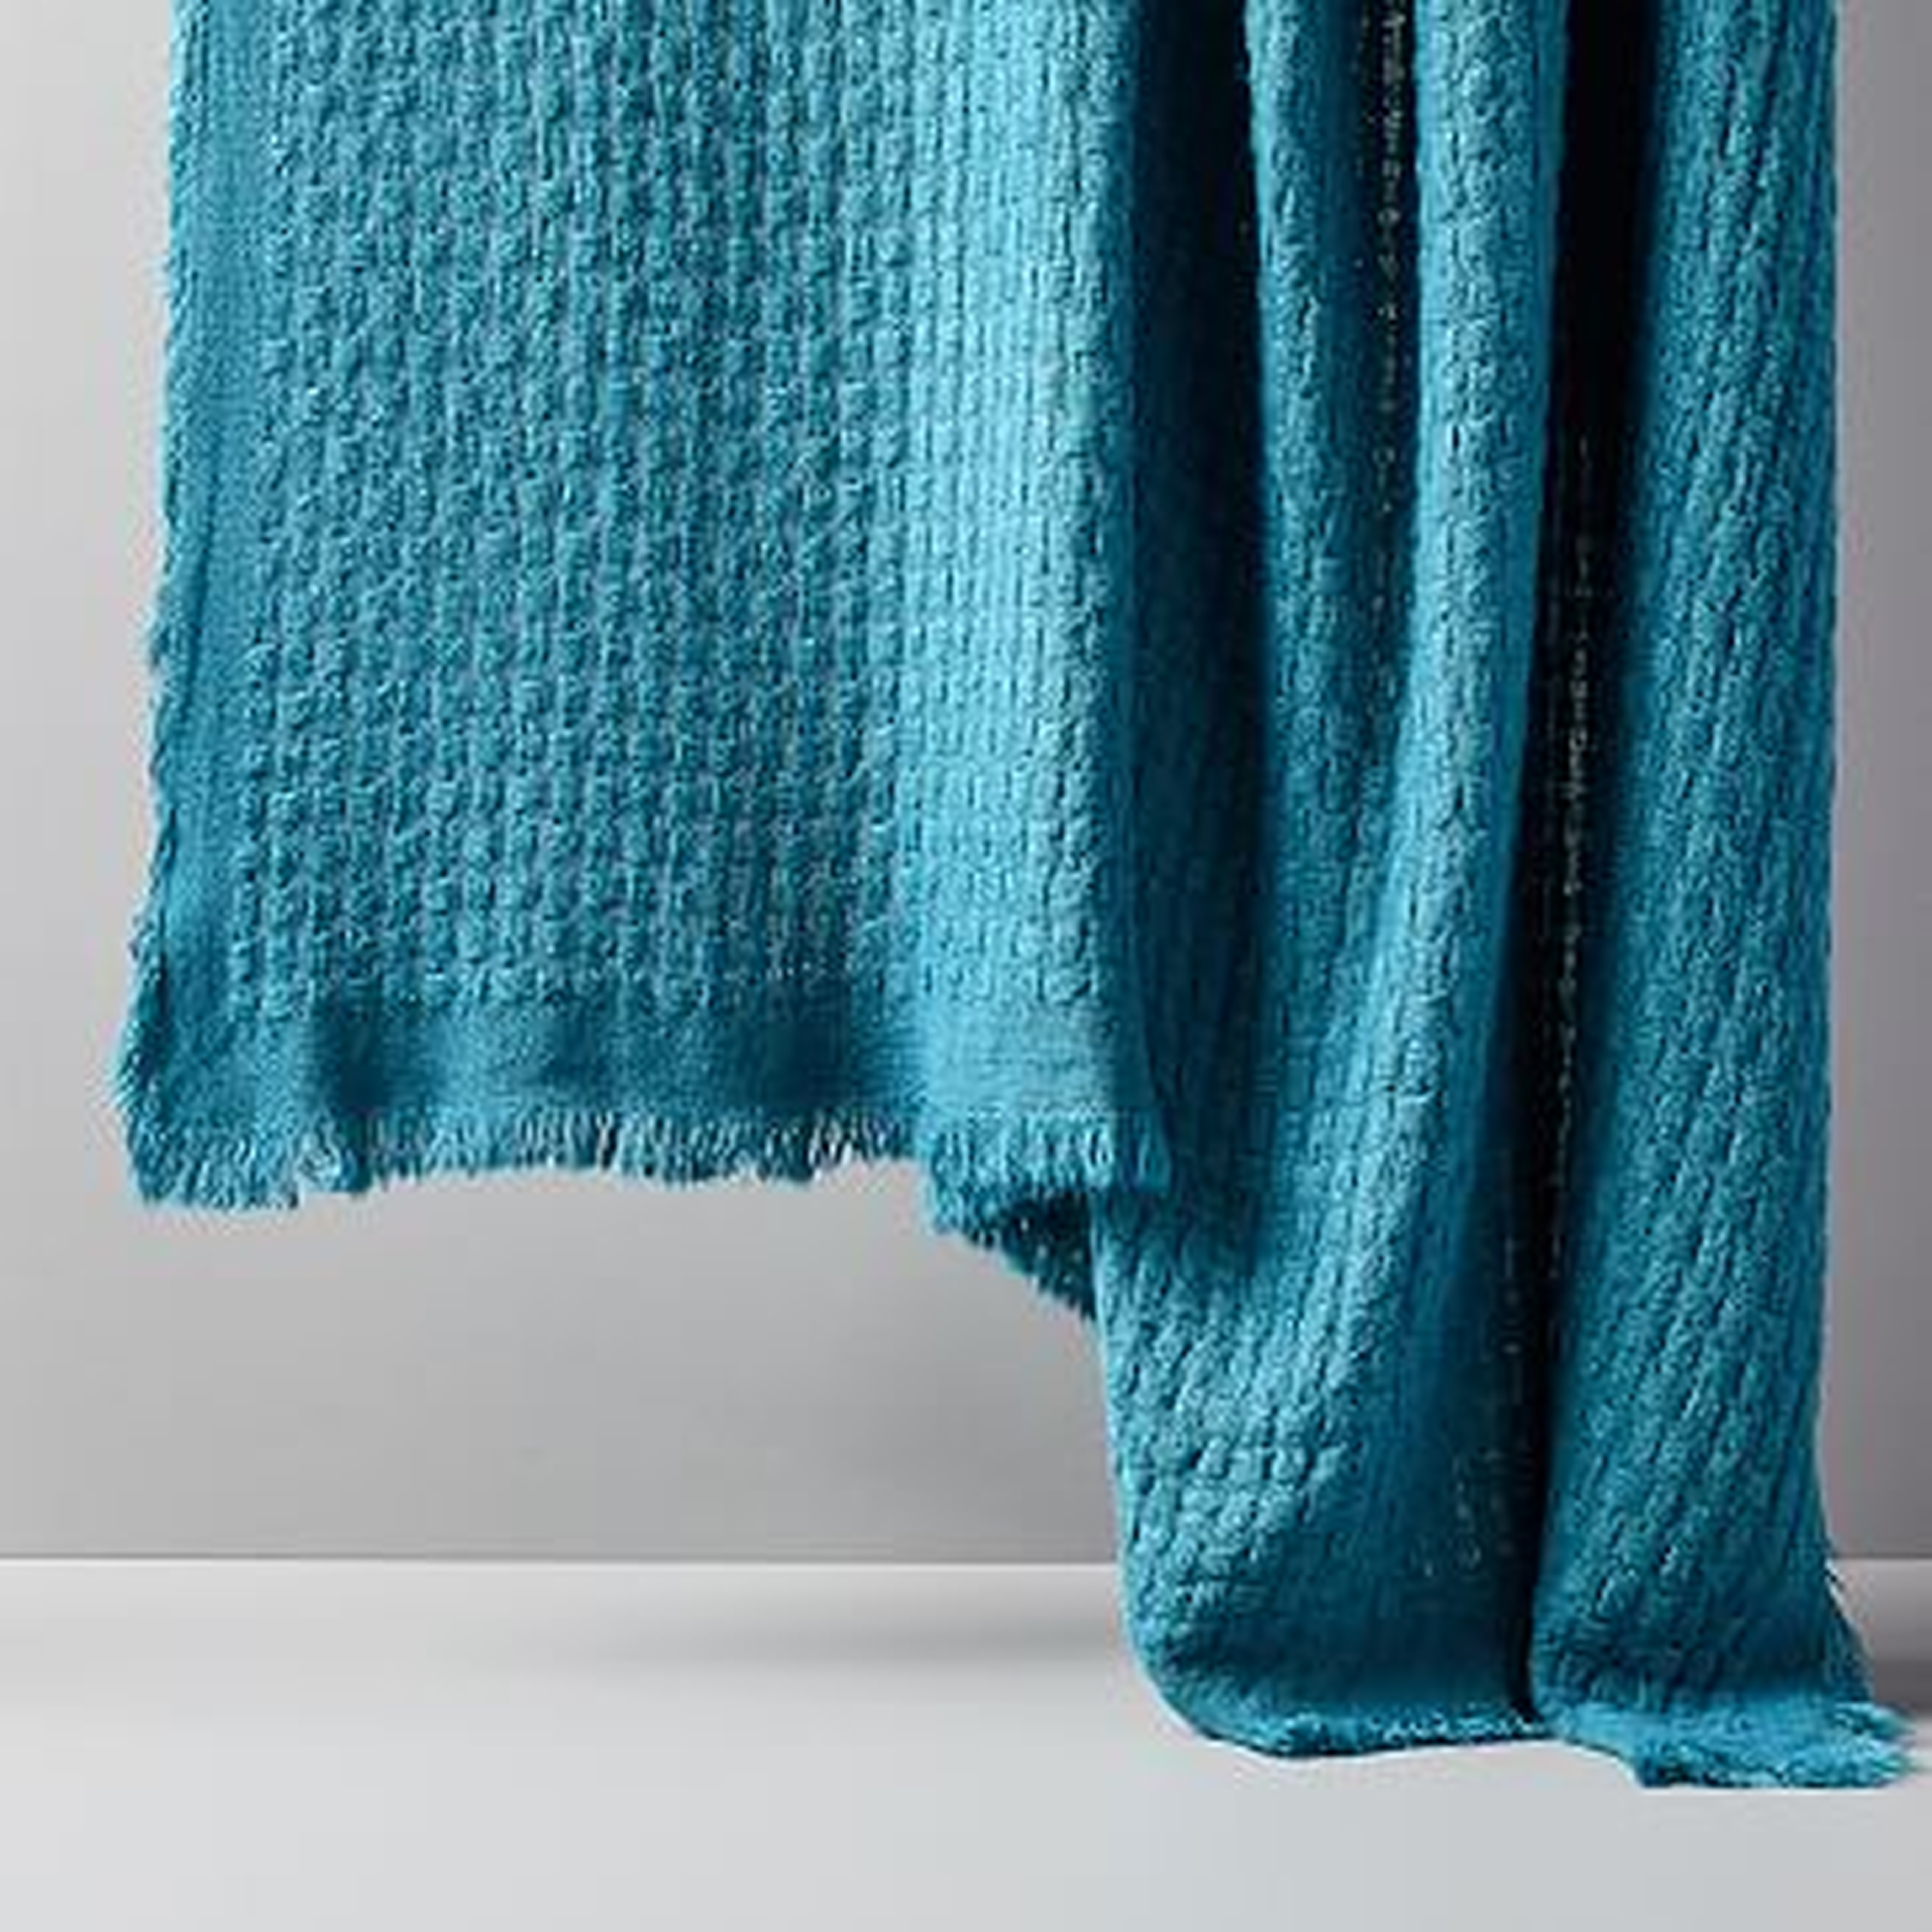 Waffle Weave Throw, Blue Teal, 50"x60" - West Elm